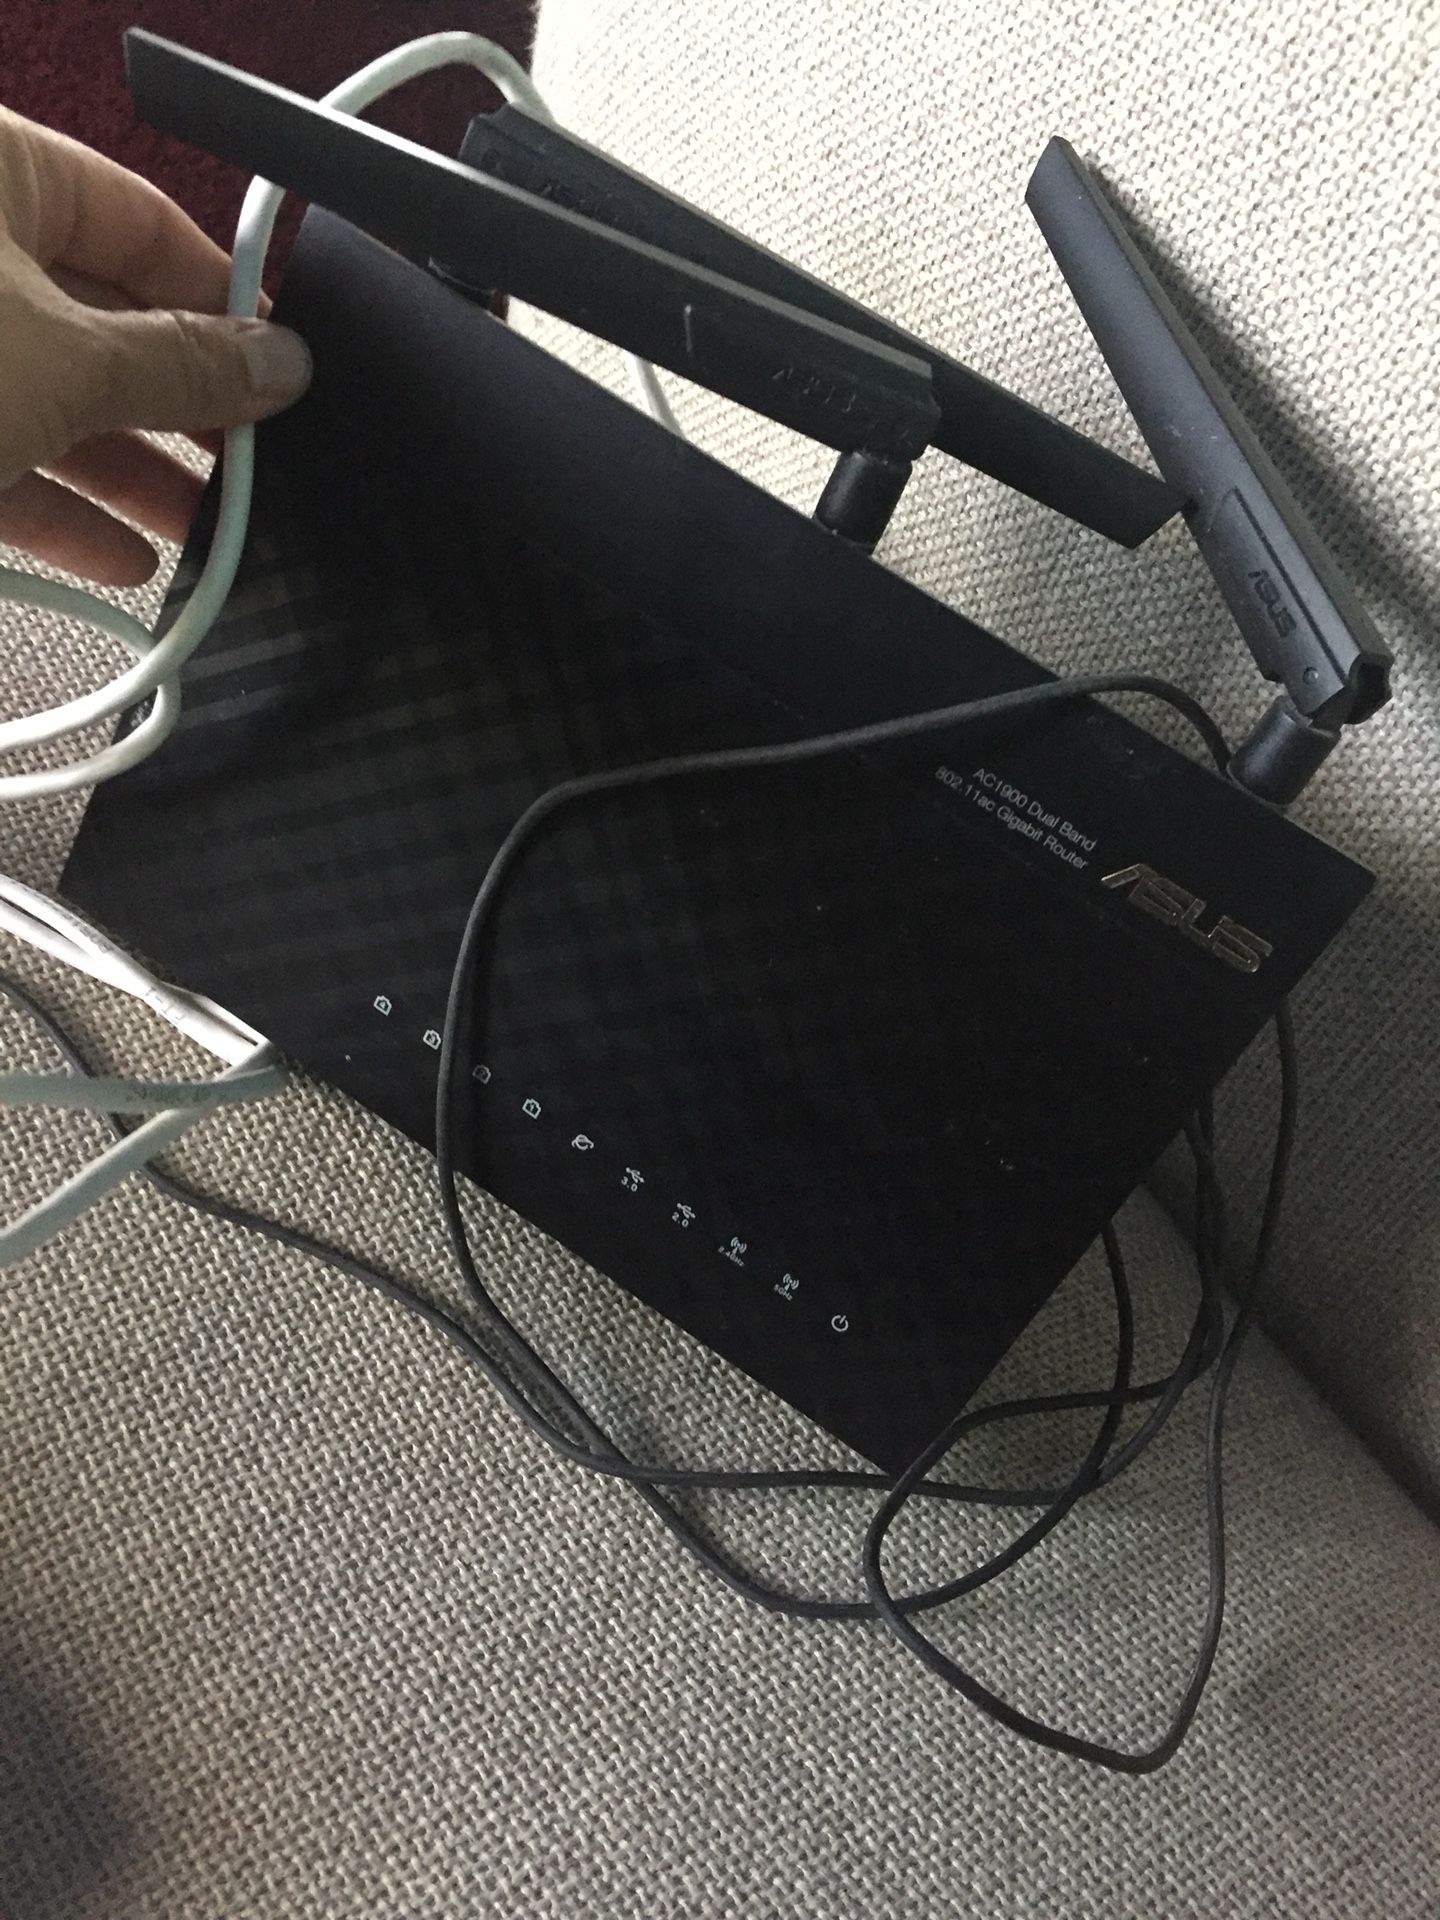 Modem + Router for Xfinity Comcast internet